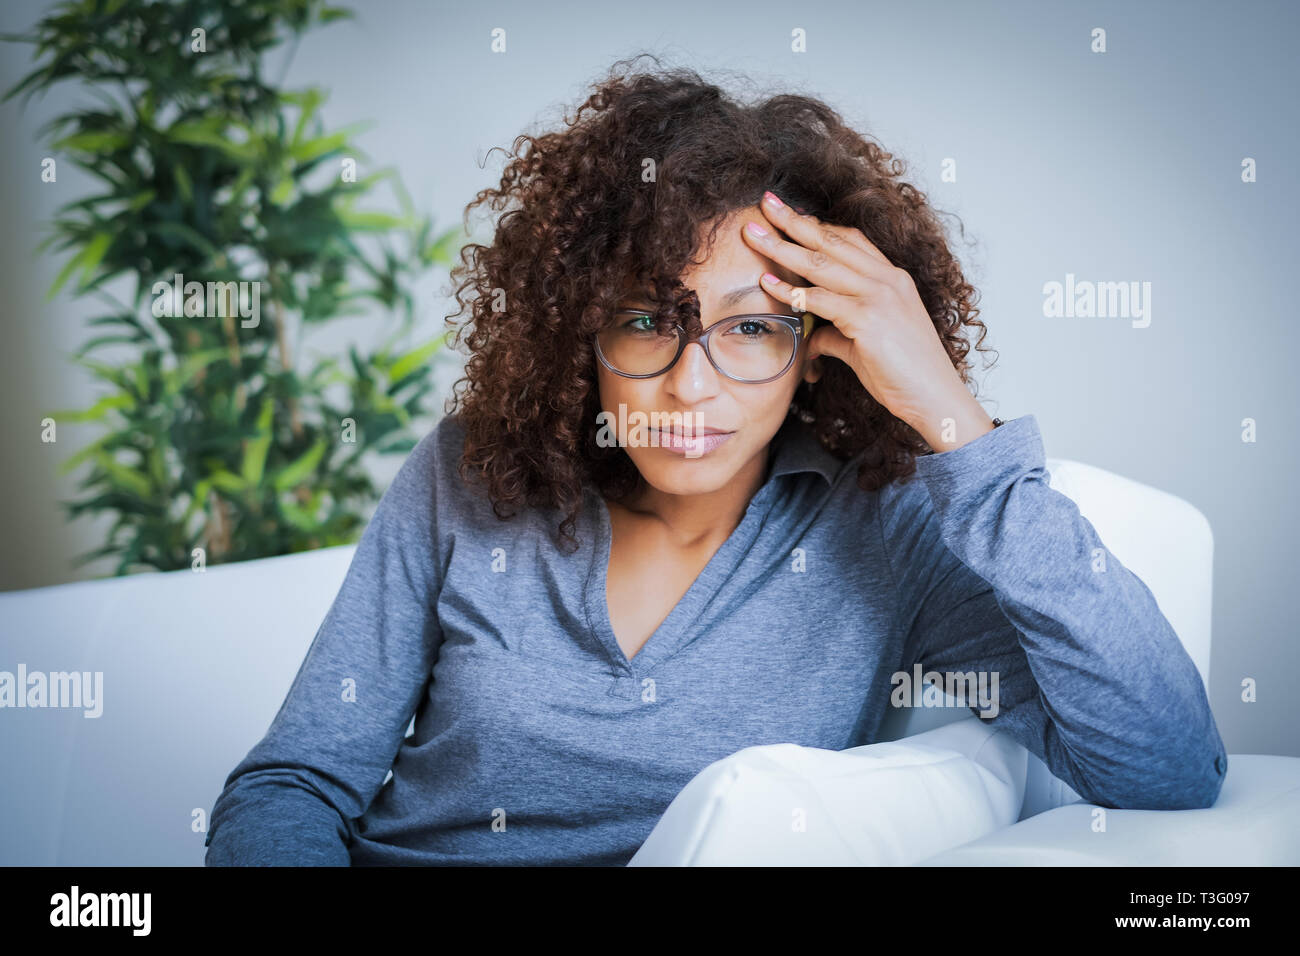 Depressed and lonely afro american woman portrait Stock Photo